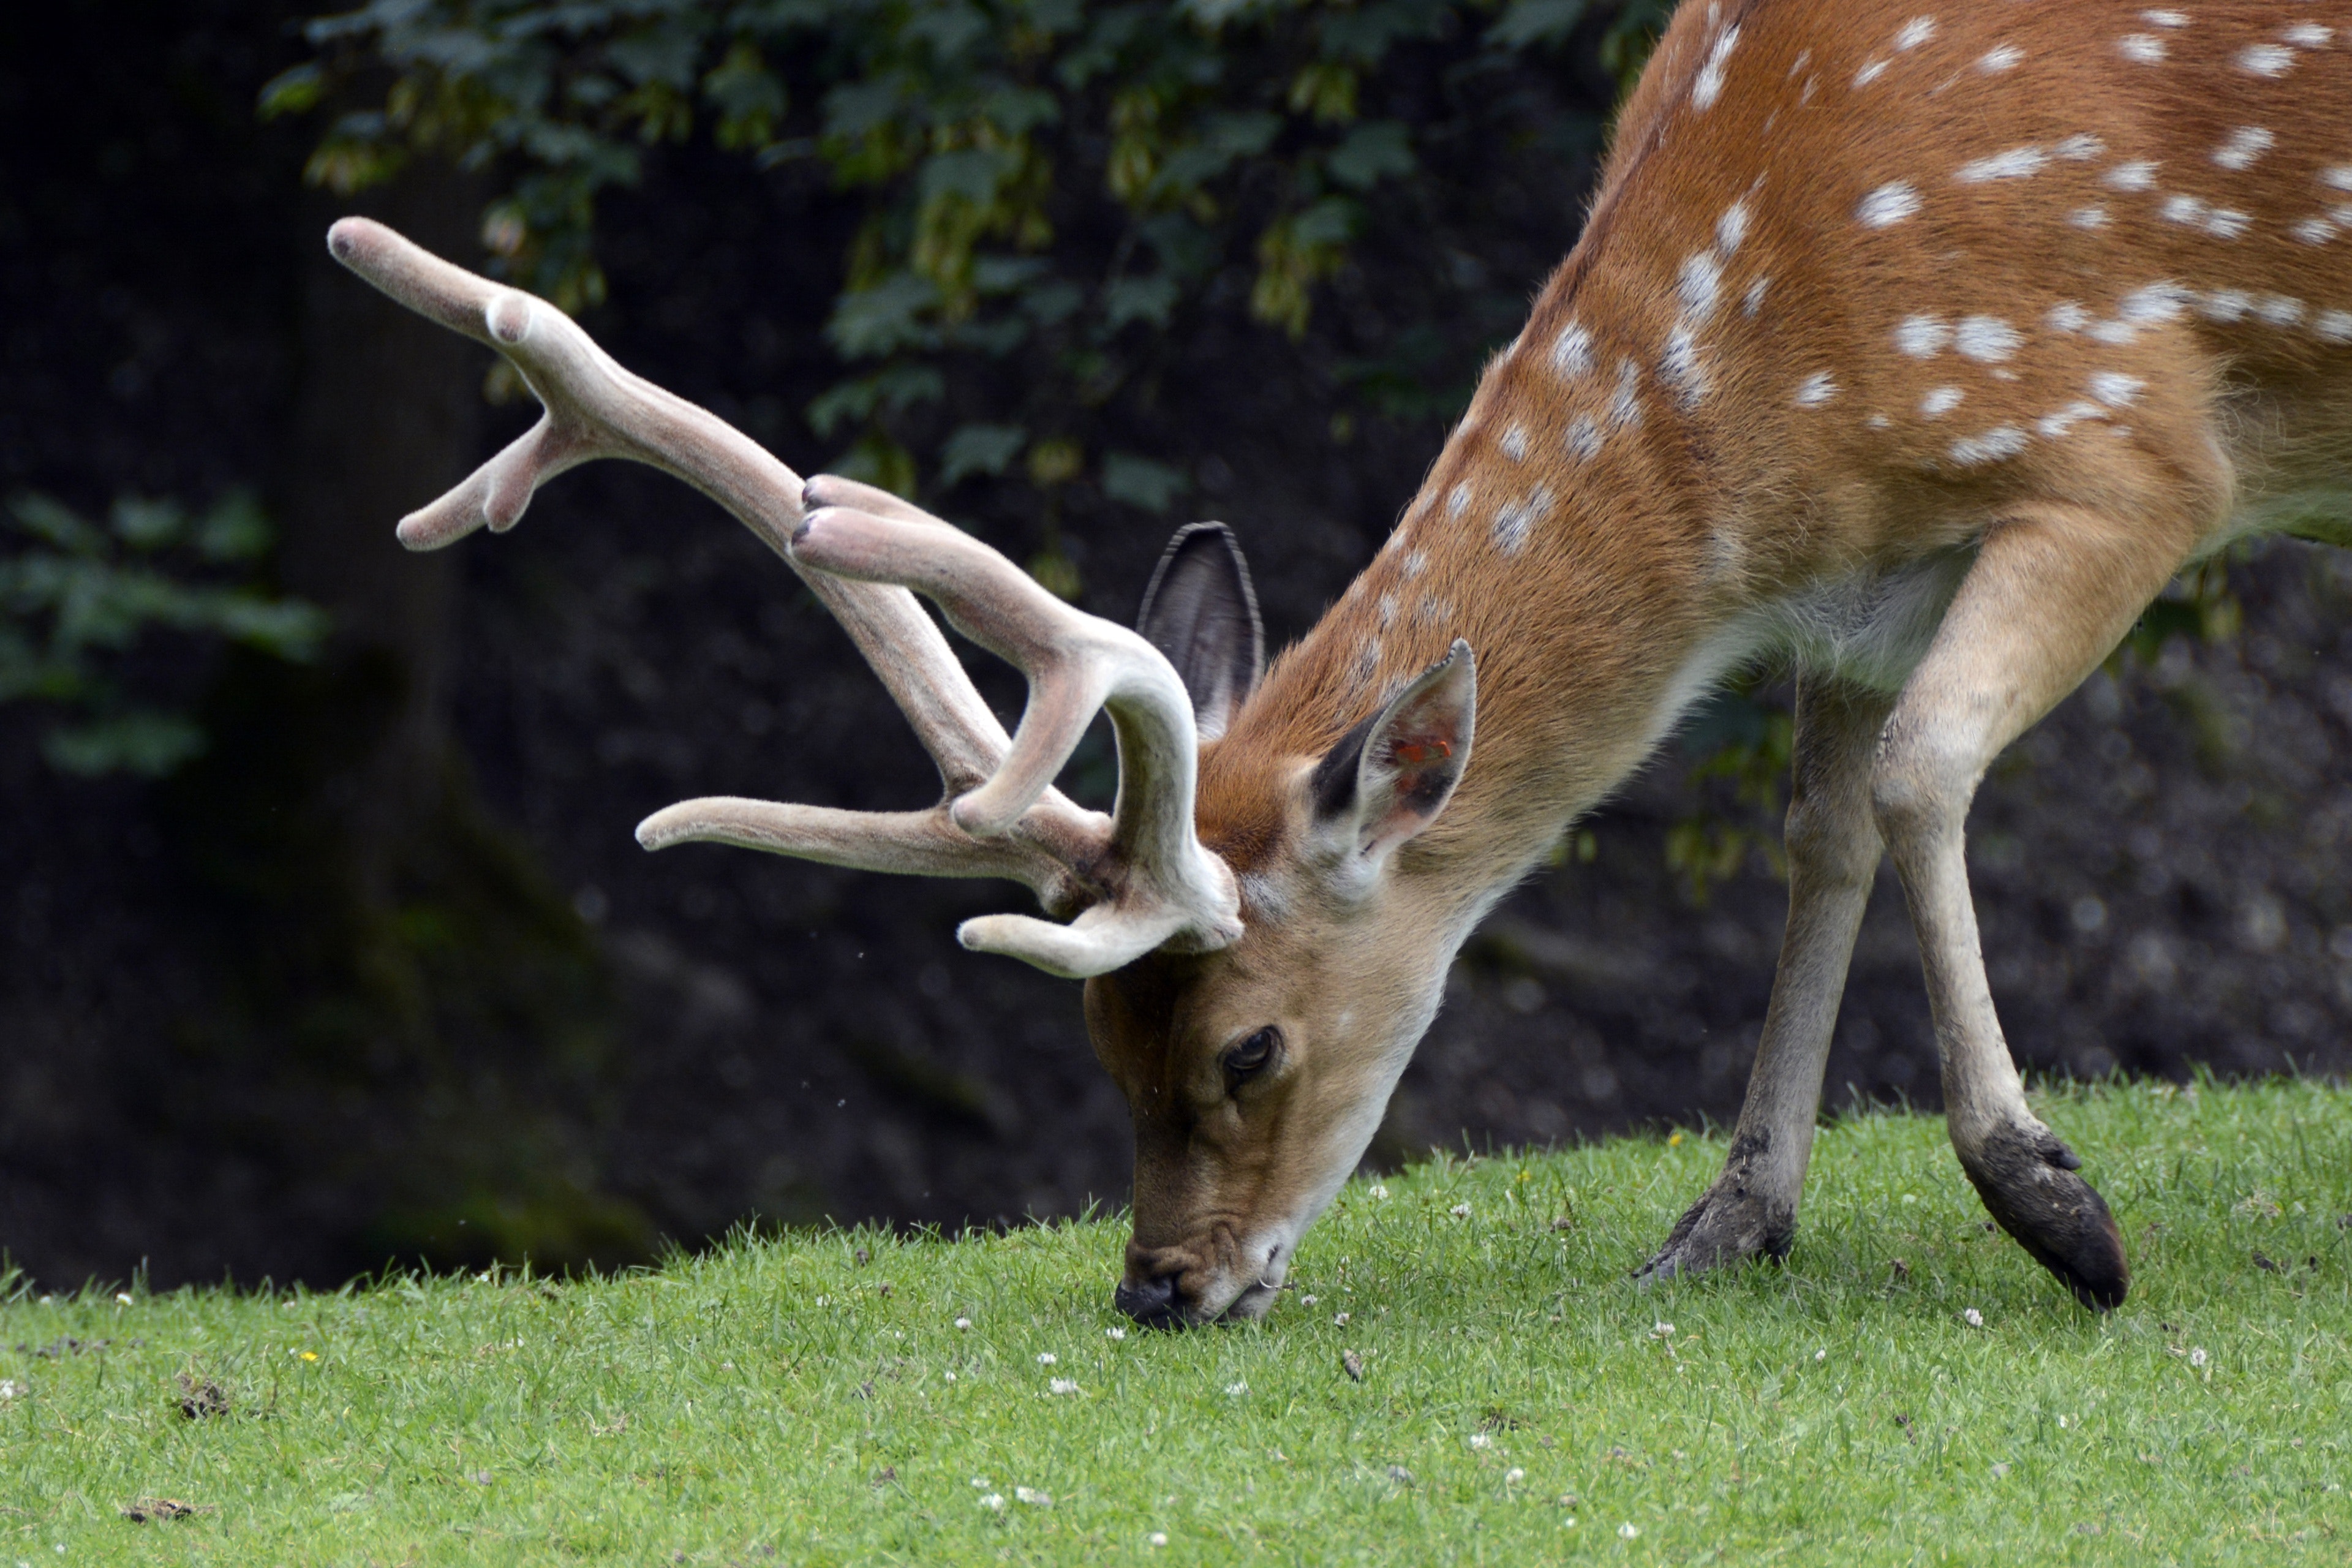 Spotted deer eating grass on green grass at daytime photo